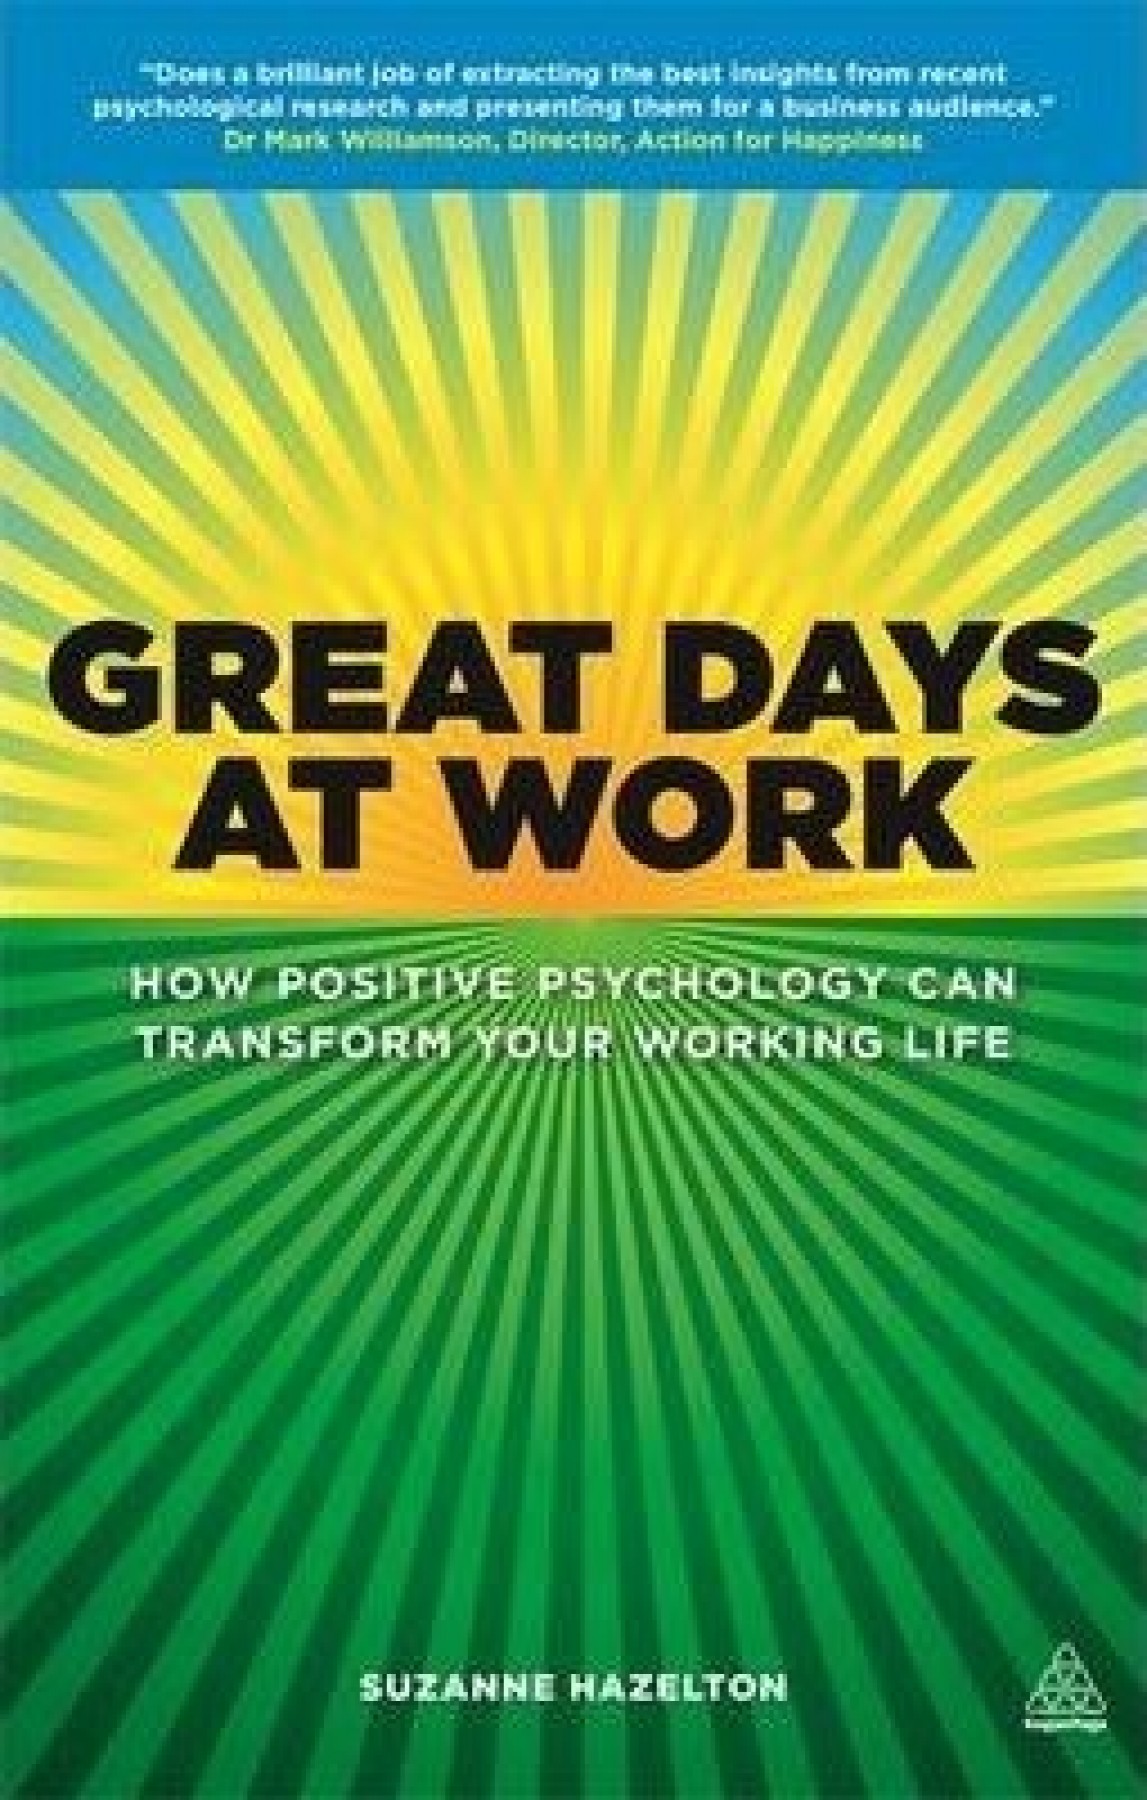 Great Days at Work: How positive psychology can transform your working life